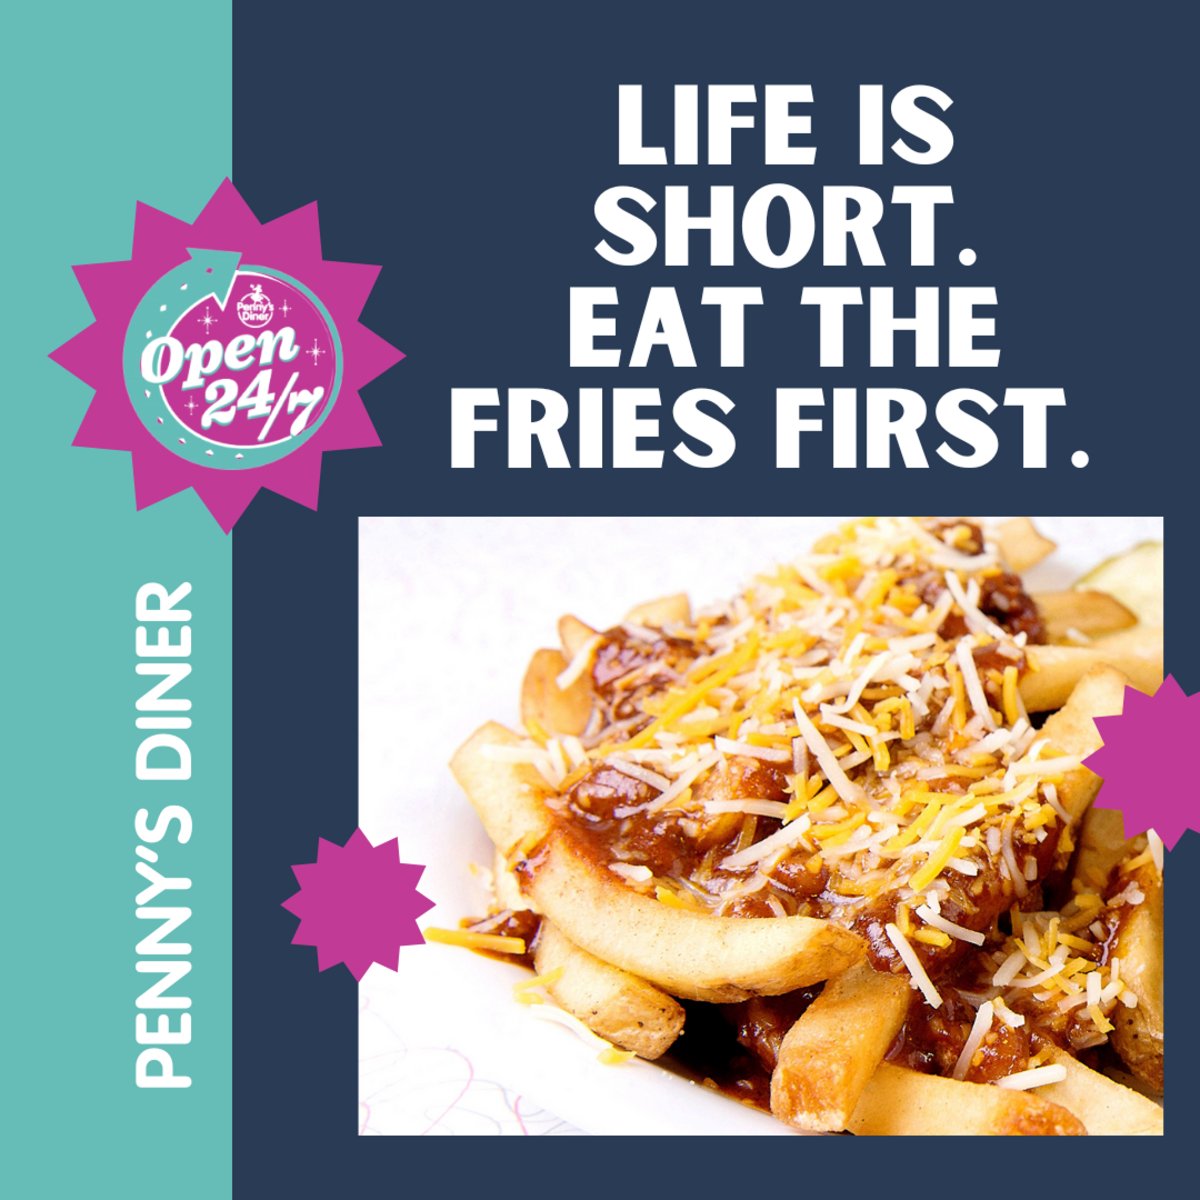 Like we always say at Penny's Diner Hearne, chili cheese the day! Stop by and kick off your feast with a basket of our legendary #chilicheesefries. Get 'em while they're hot!🔥🍟 #PennysDiner